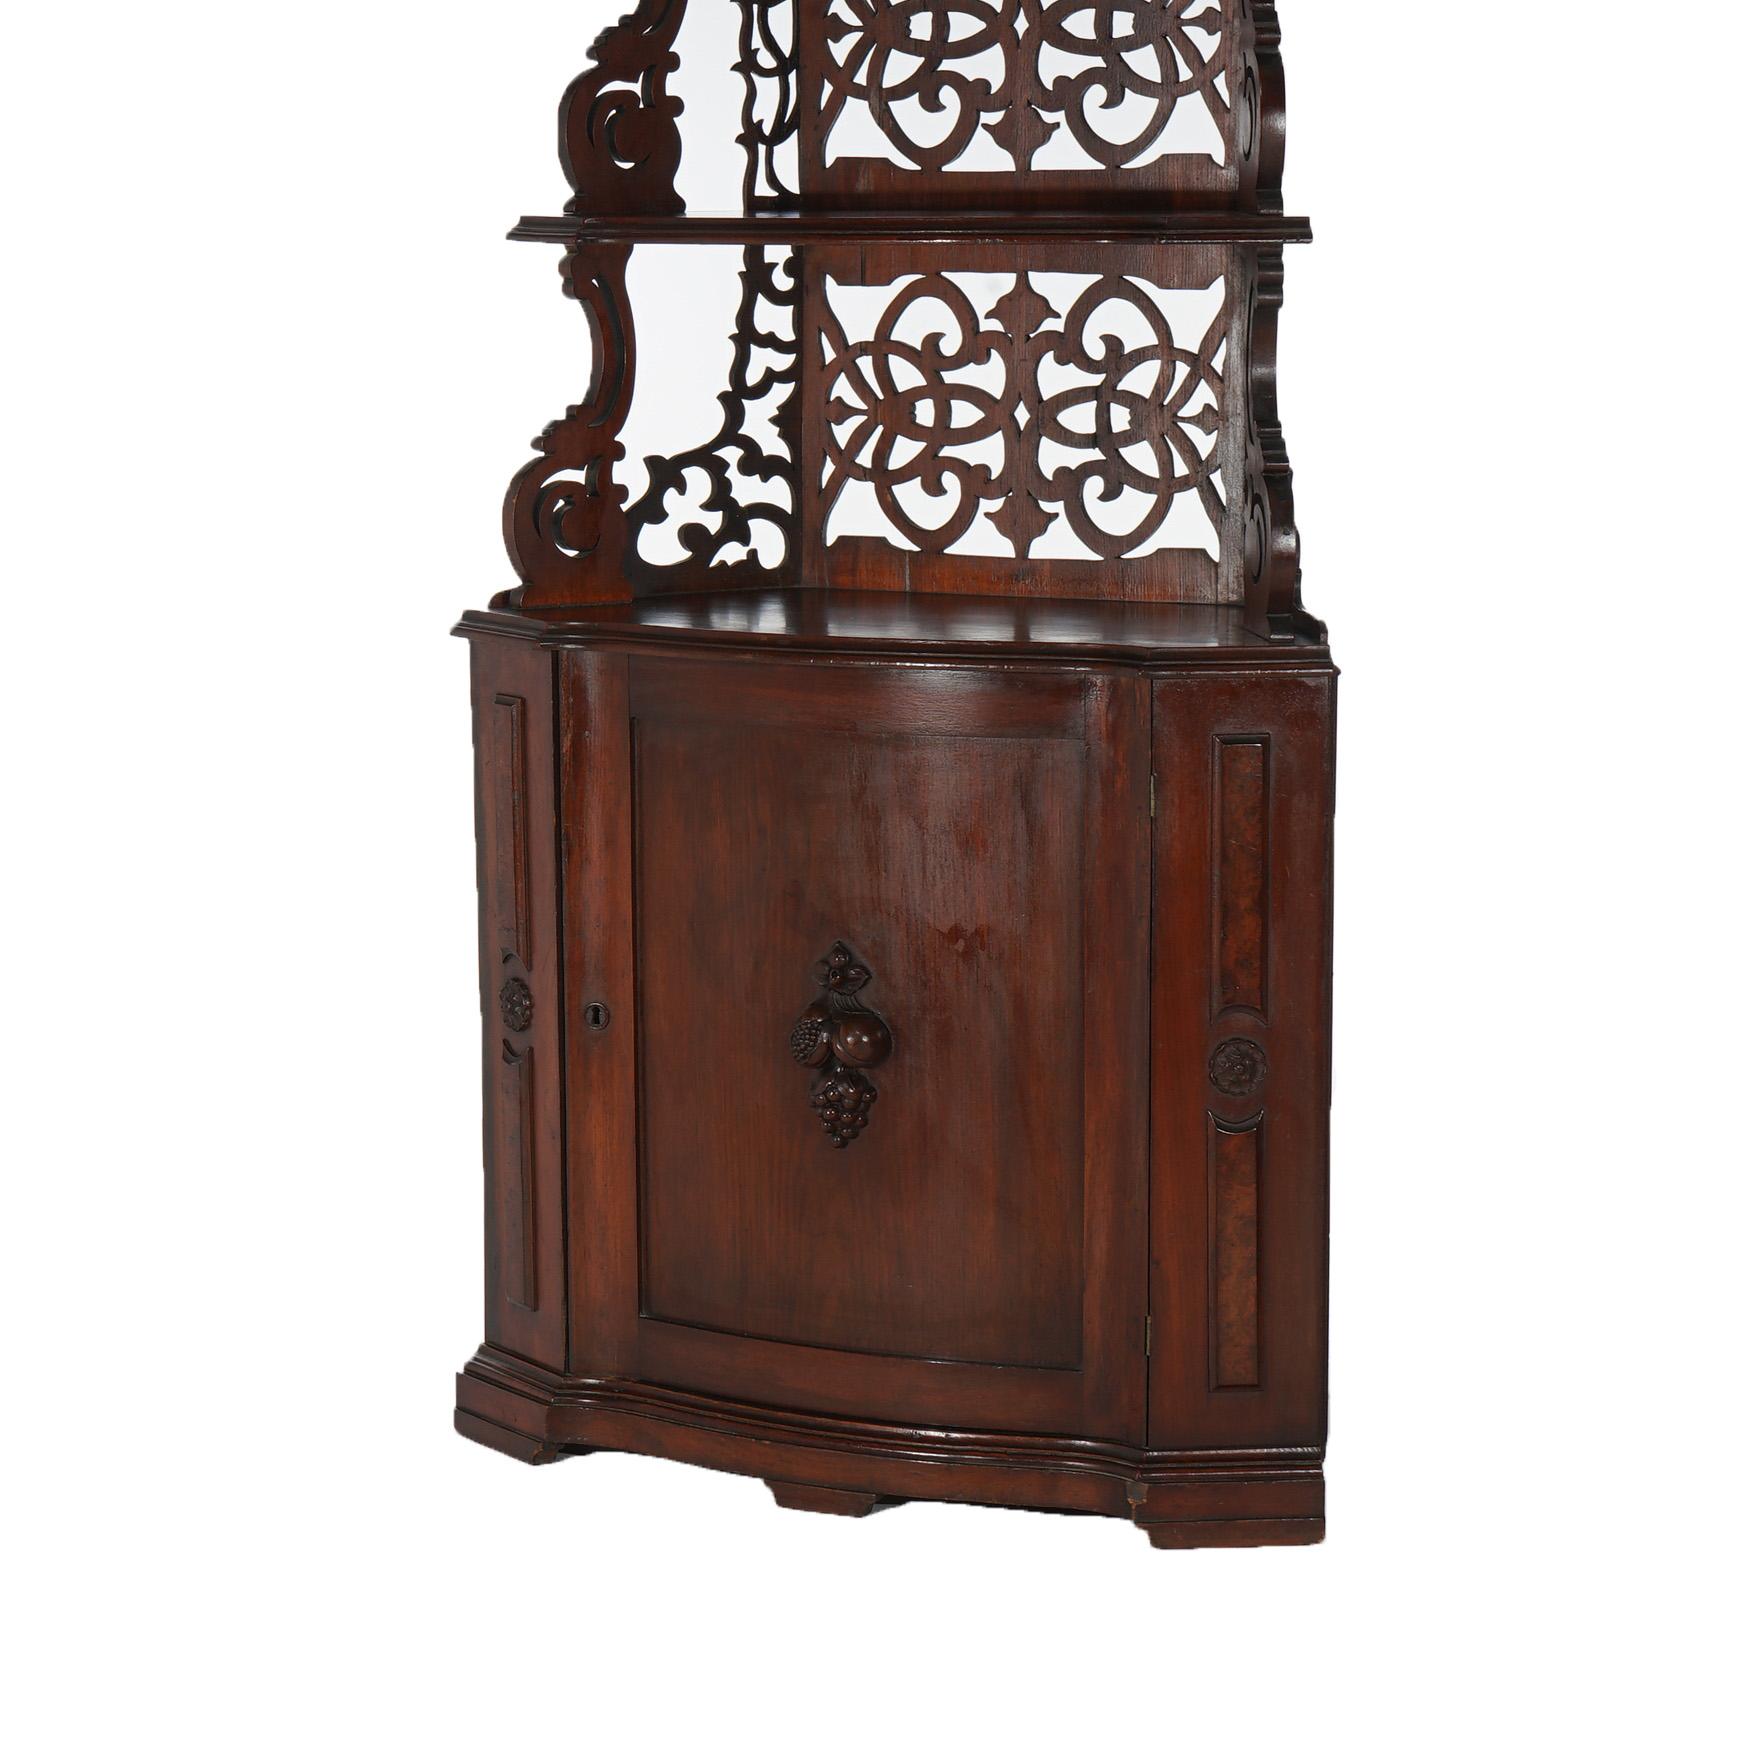 Antique Victorian Walnut Etagere with Reticulated & Graduated Carved Shelving In Good Condition For Sale In Big Flats, NY